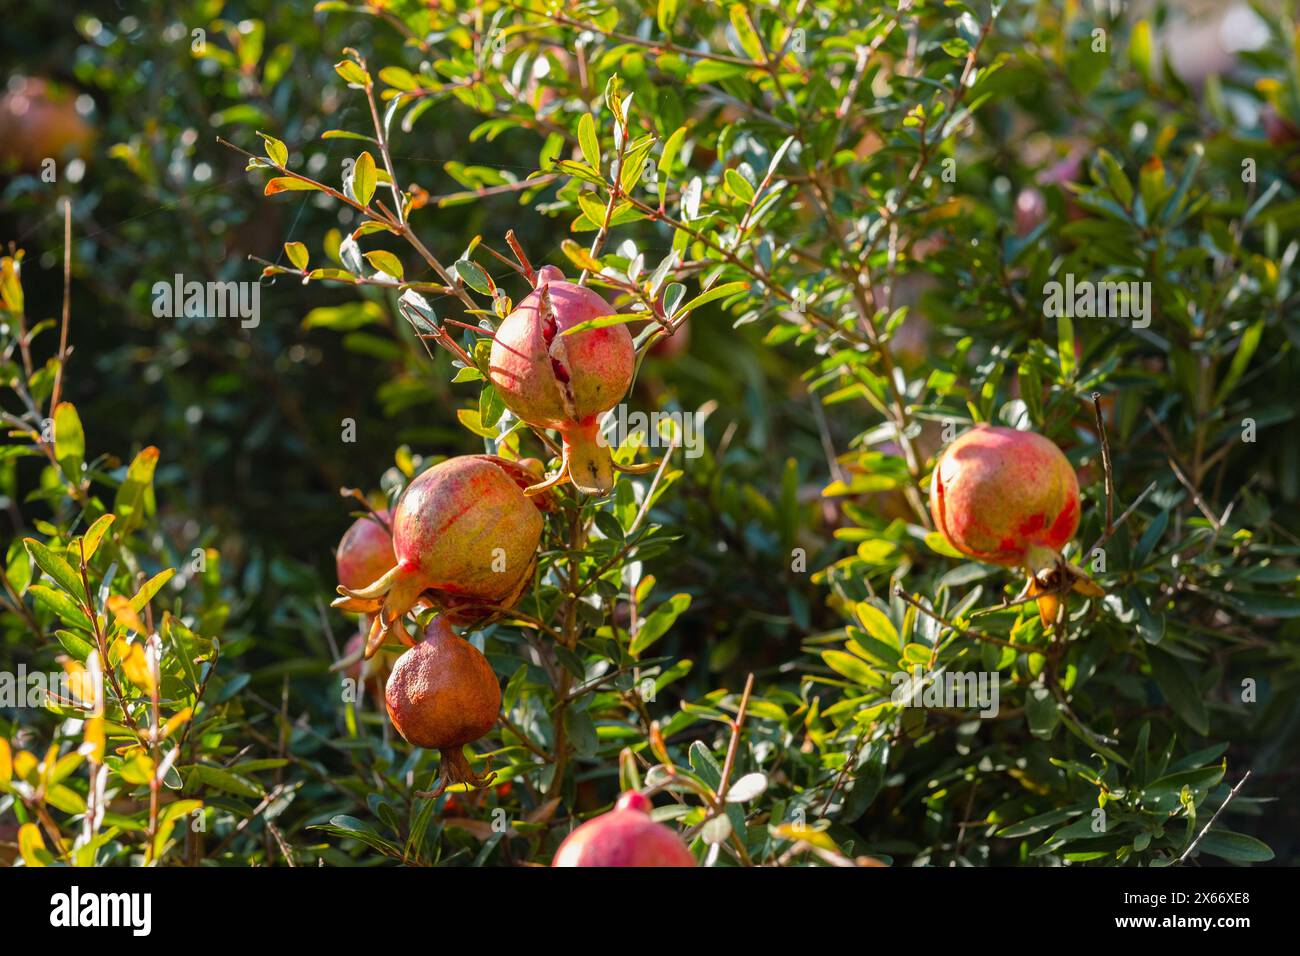 Sun-kissed pomegranates dangle amidst the verdant leaves of their tree, offering a vibrant display of ripening fruit ready for harvest. The warm sunlight enhances their rich, red hues. Sunlit Pomegranate Bounty Stock Photo